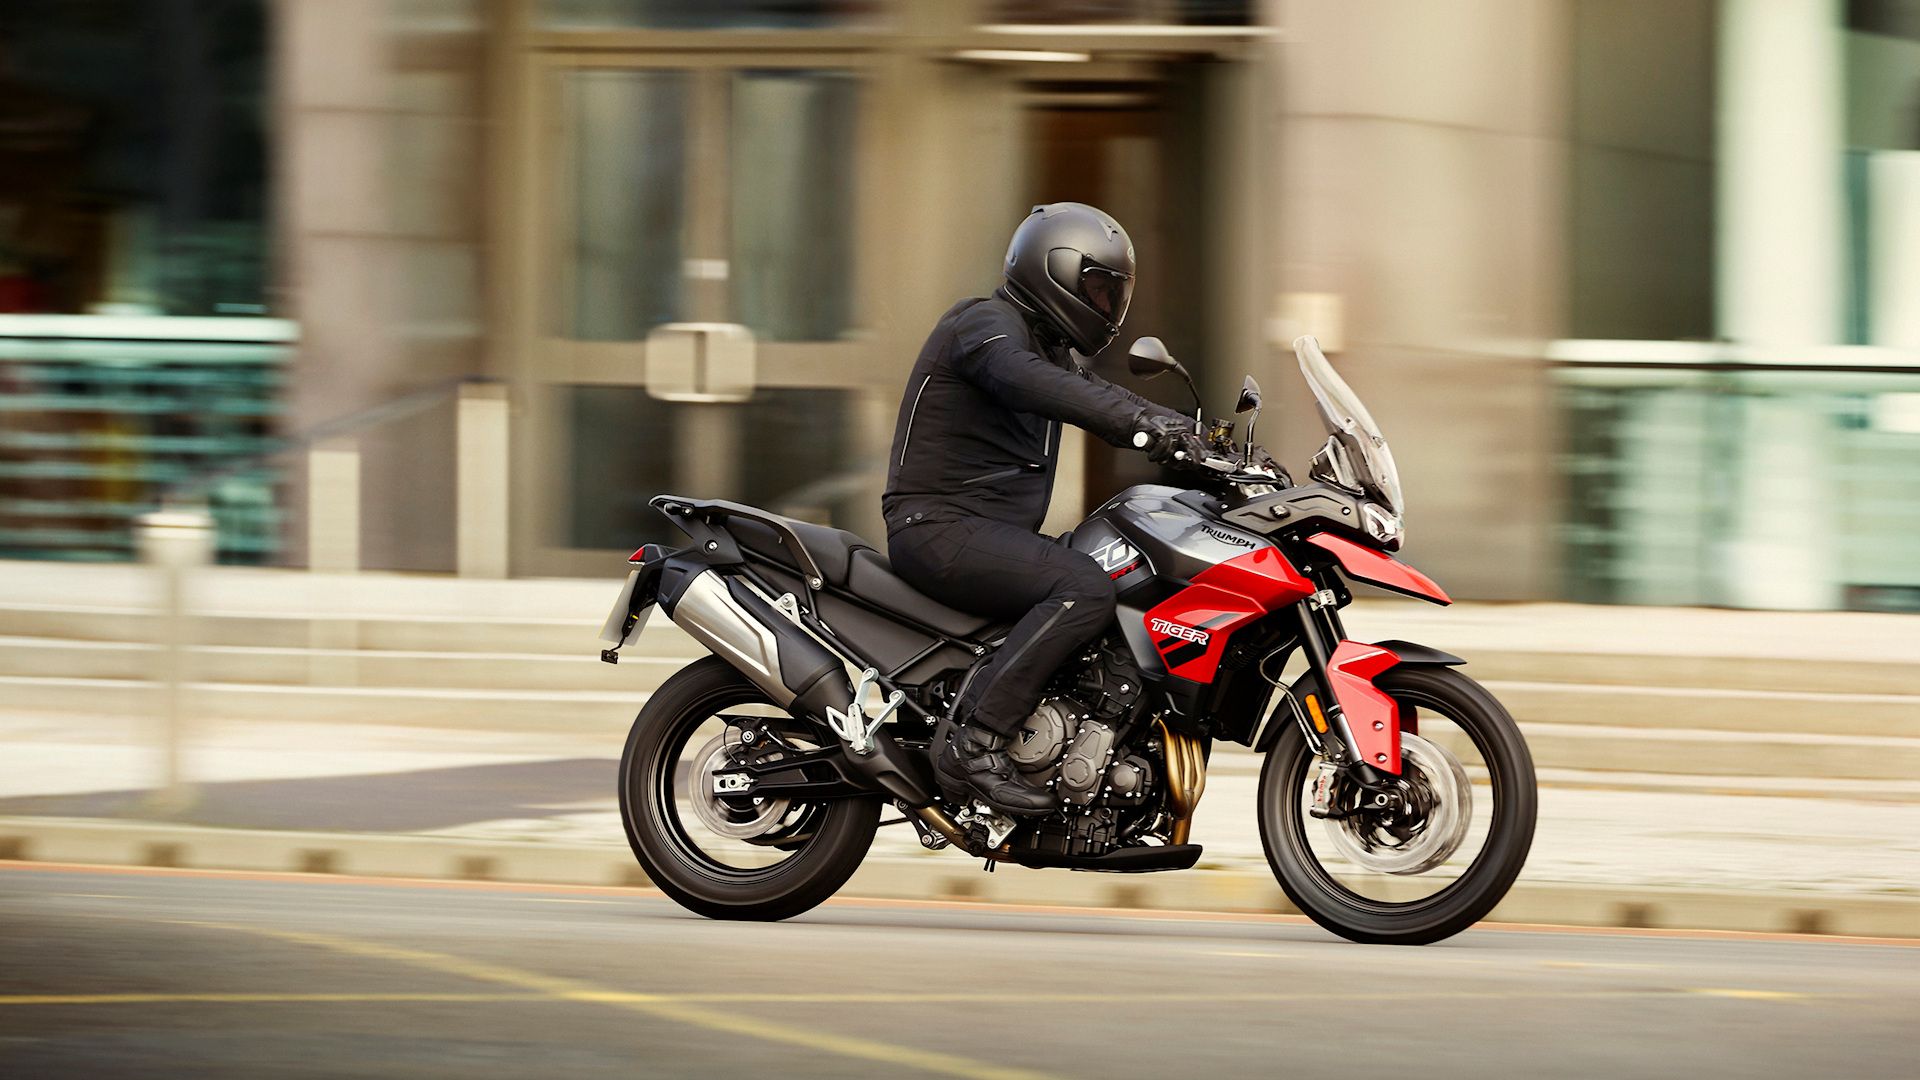 Top 10 Touring Motorcycles On The Market